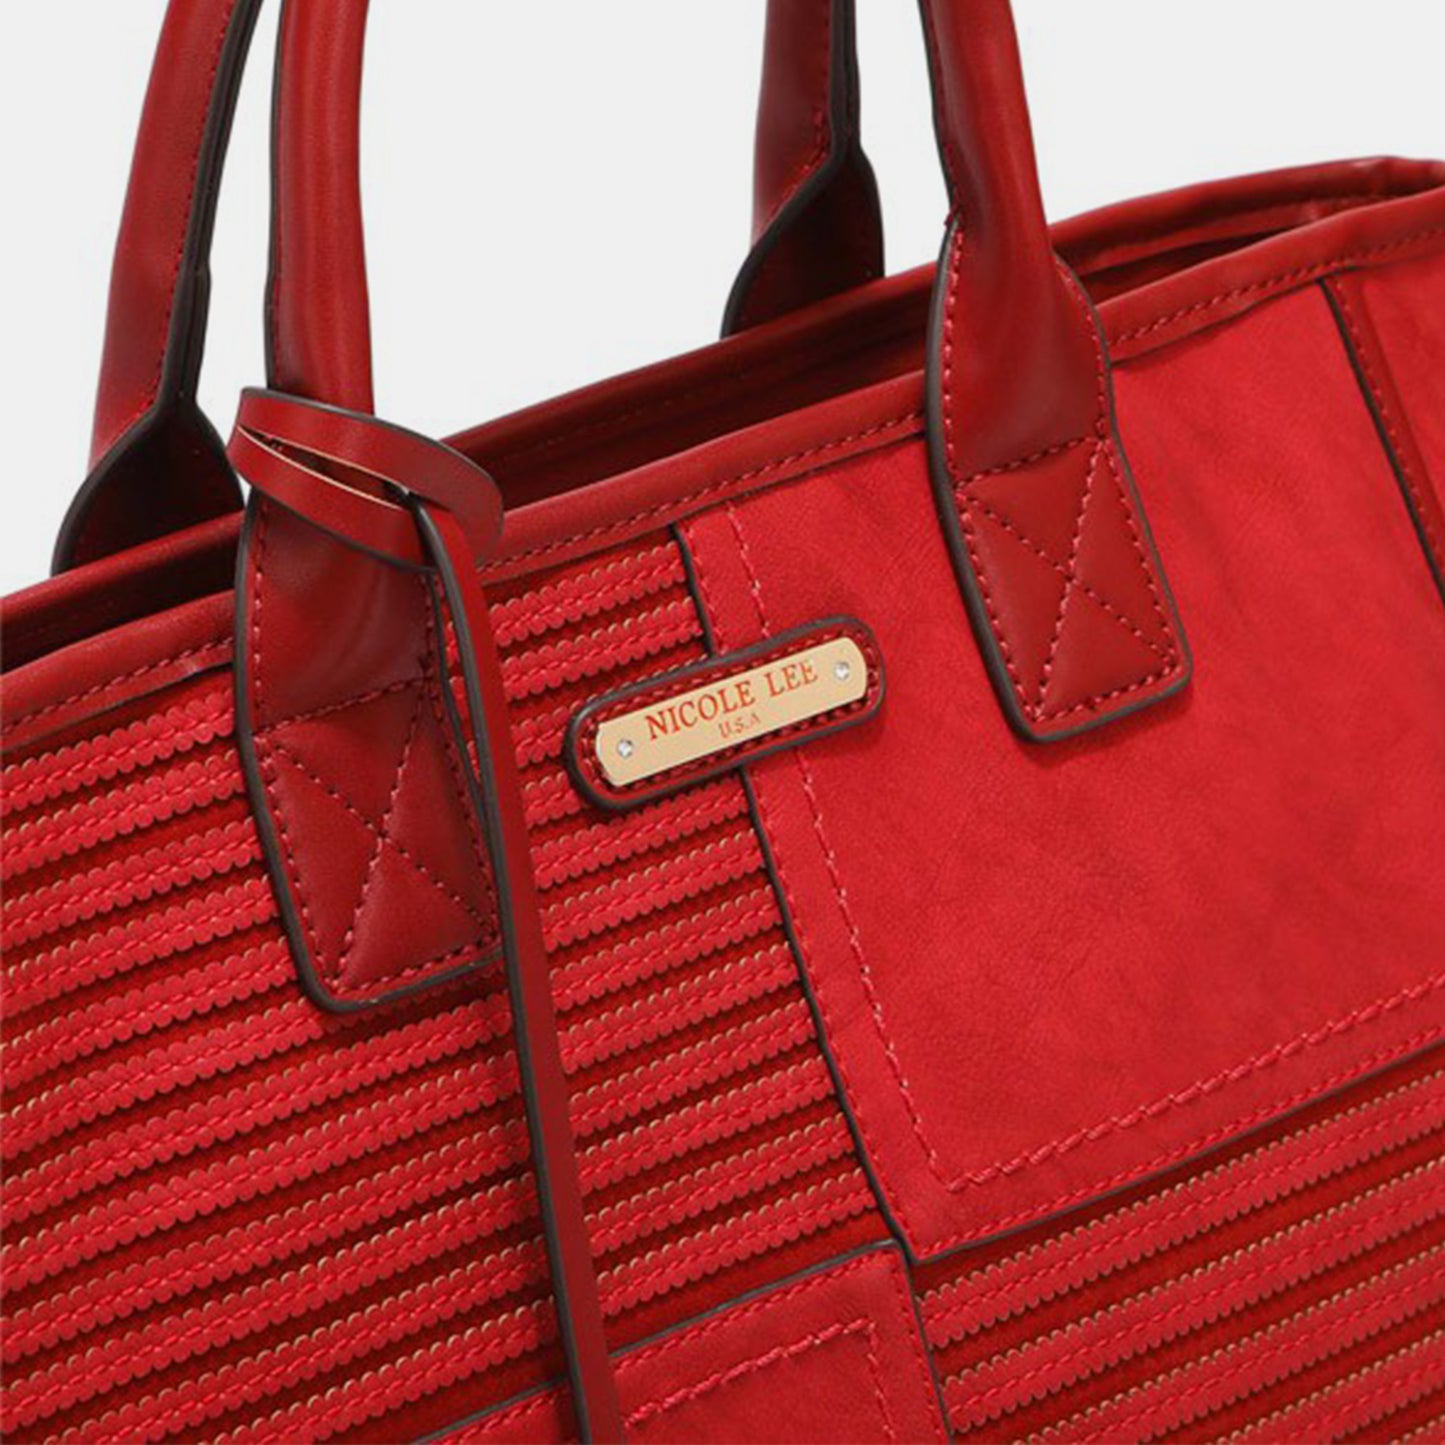 Close-up image of the Nicole Lee USA Scallop Stitched Handbag, available at Marianela's Exclusive Shop, LLC. This red vegan leather handbag features scallop-stitched detailing and dual handles. A gold-colored metal nameplate on the front reads "NICOLE LEE USA." The bag boasts a stylish, modern design with detailed craftsmanship, making it an elegant accessory for any occasion.